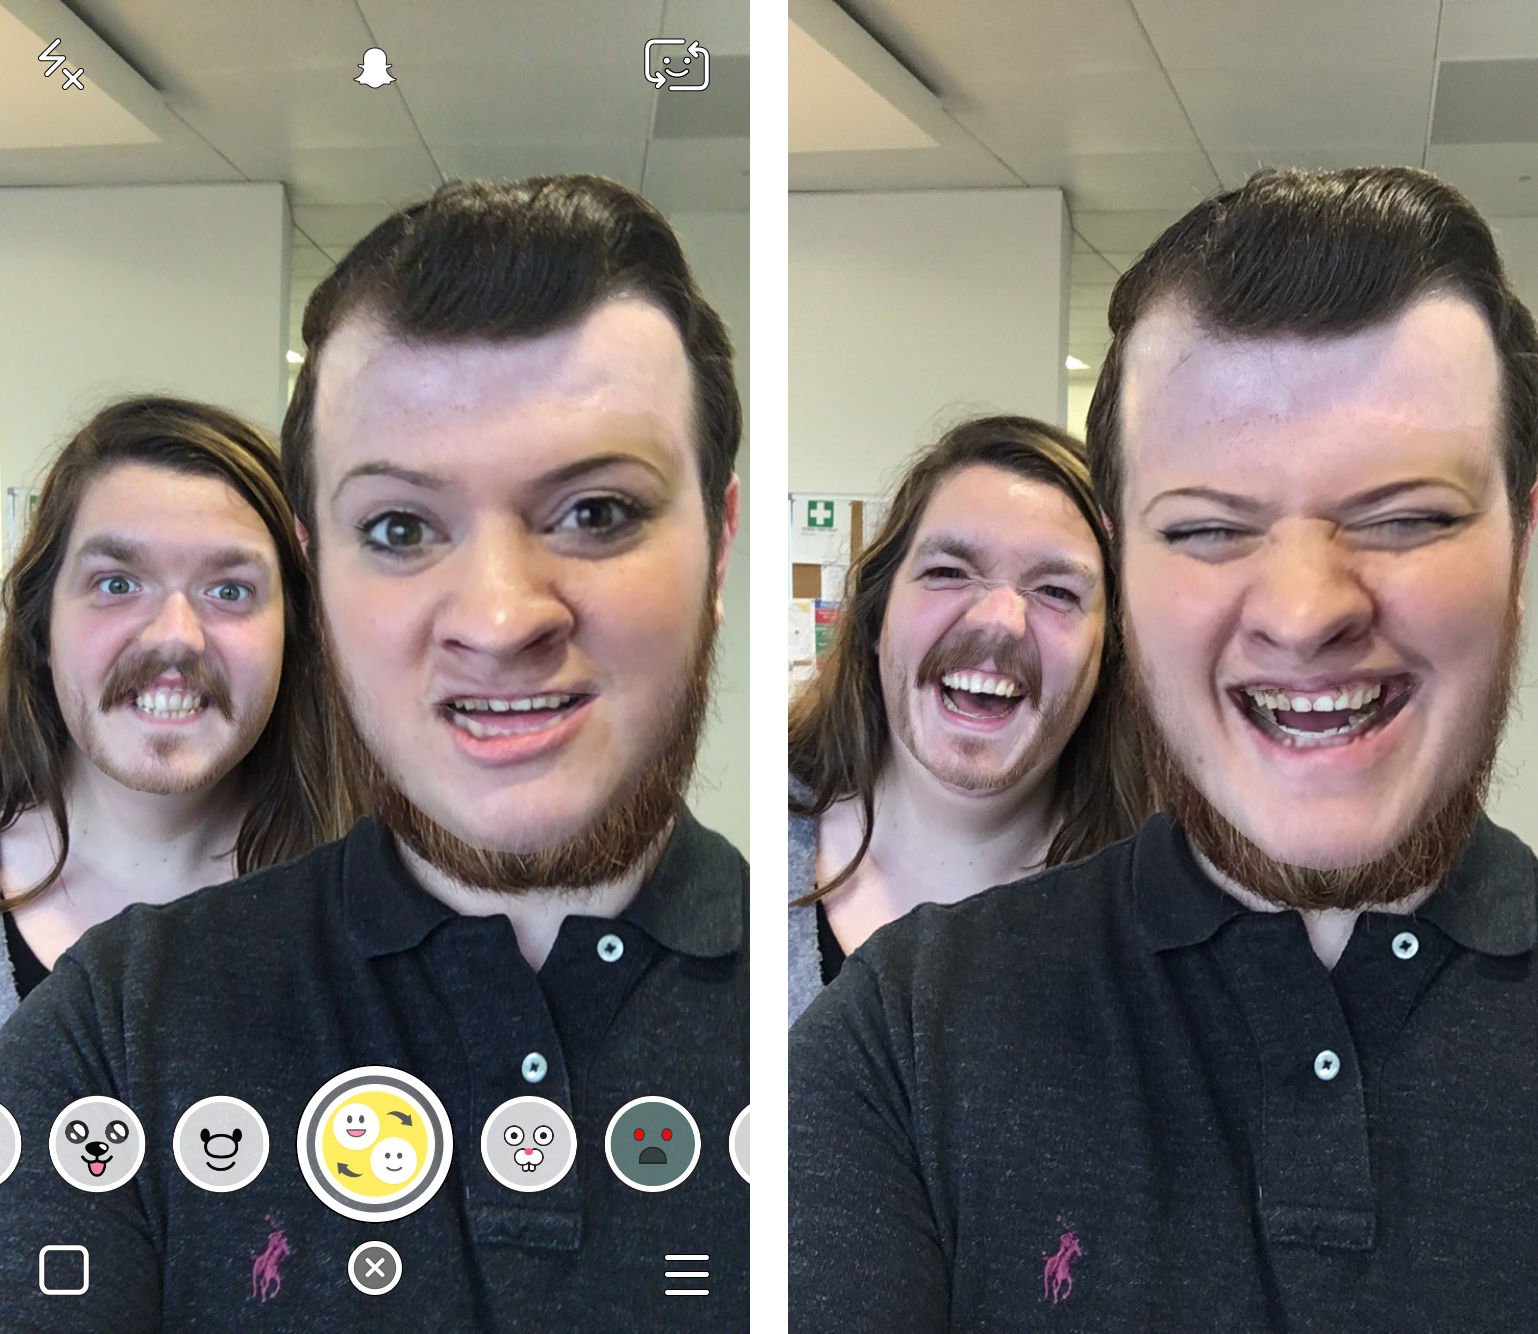 20 Best Snapchat Filters & Lenses to Make Your Snaps Special